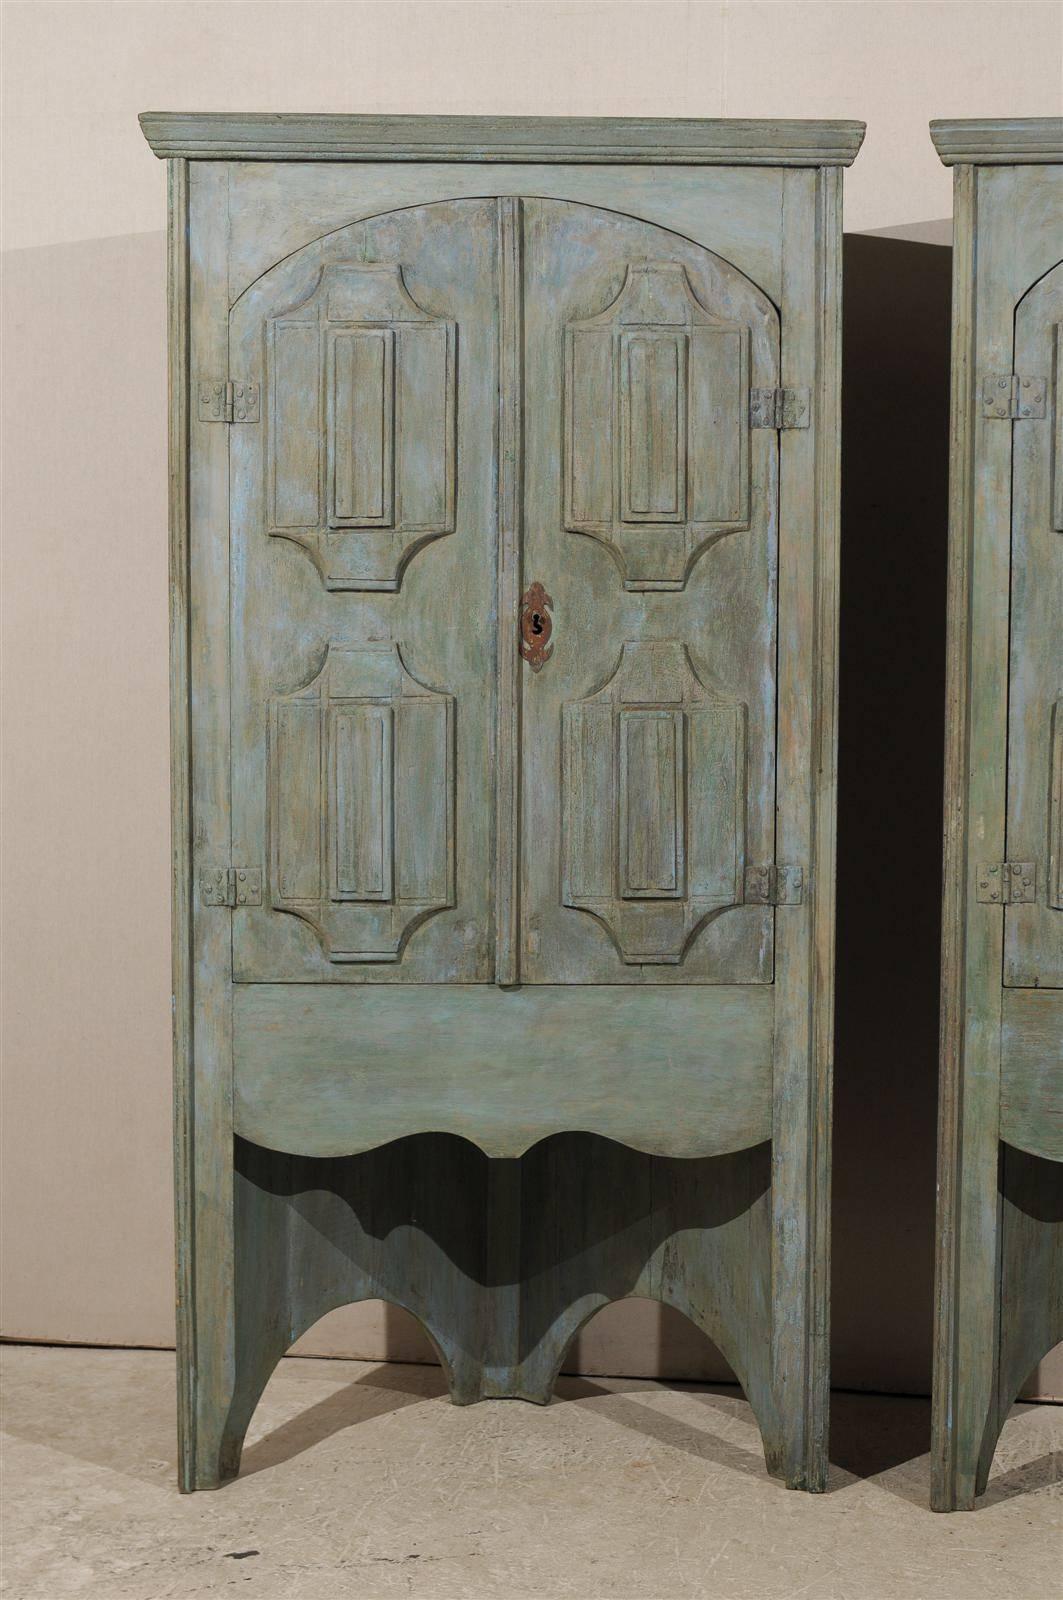 A 19th century Brazilian painted wood corner cabinet with arched doors decorated with geometrical motifs. This corner cabinet is painted in an aqua color and features two doors in their upper section that open up with a key. The central point of